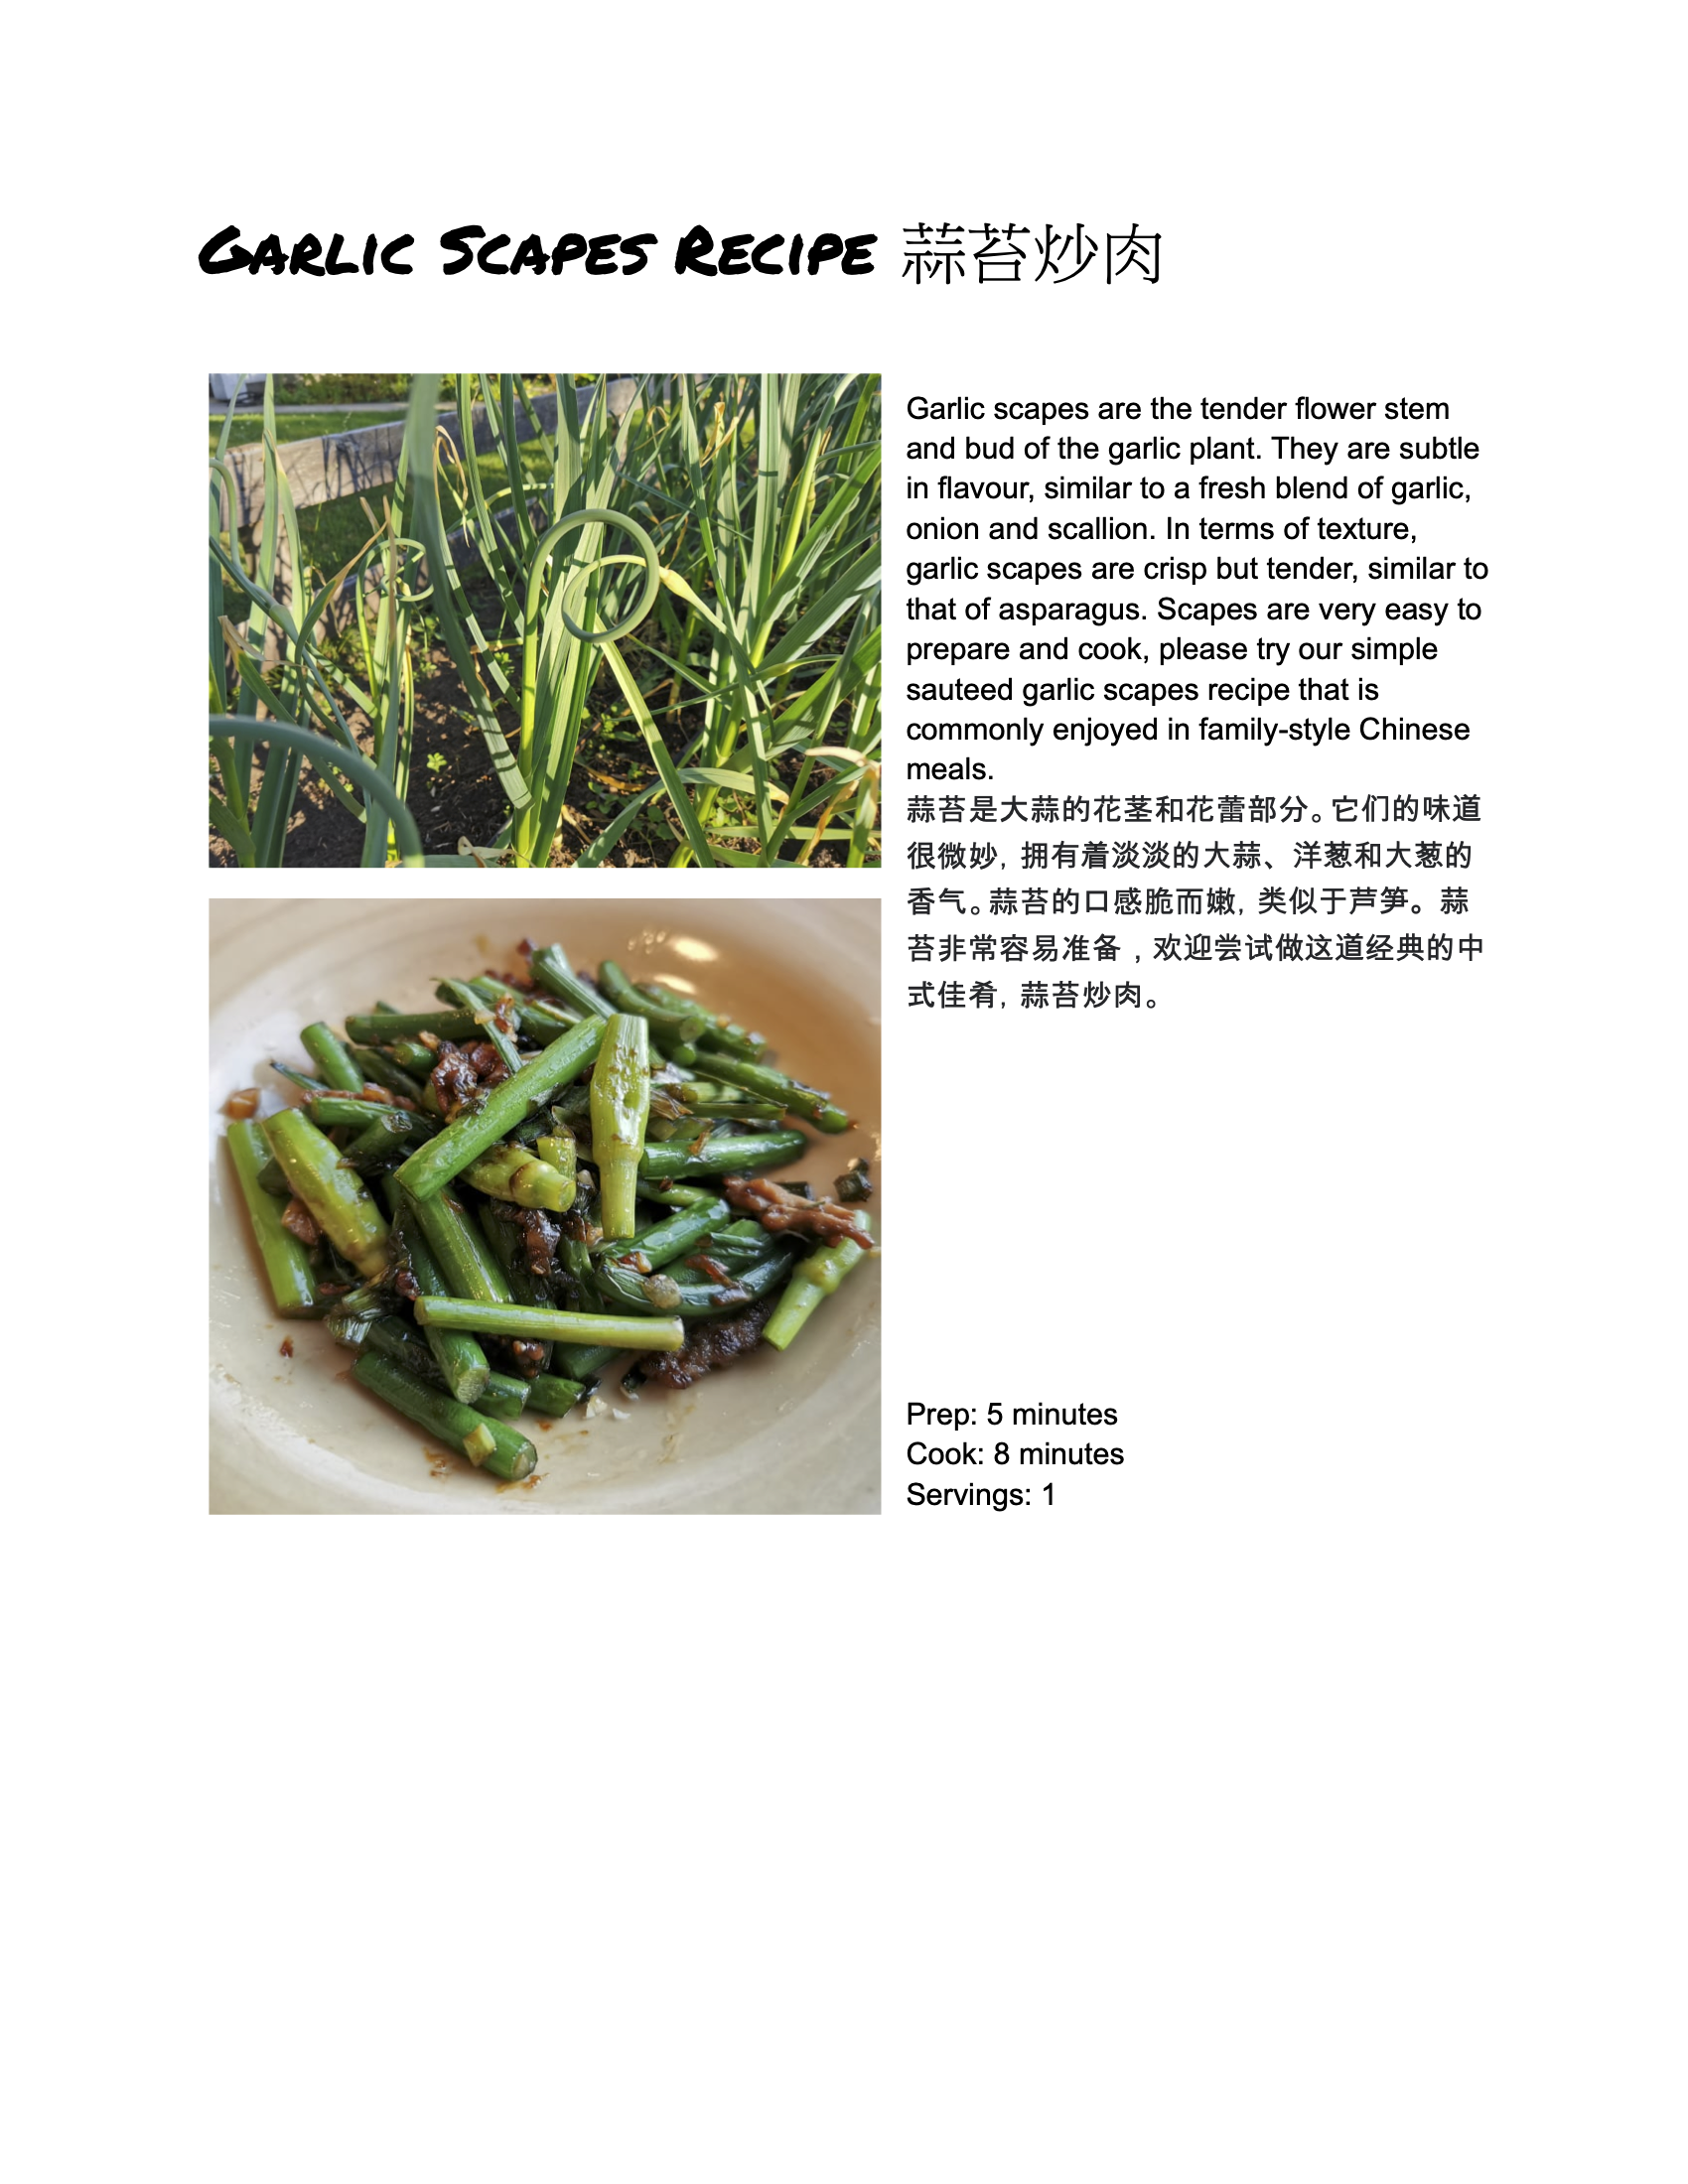 Garlic Scapes Recipe with Measurements.png